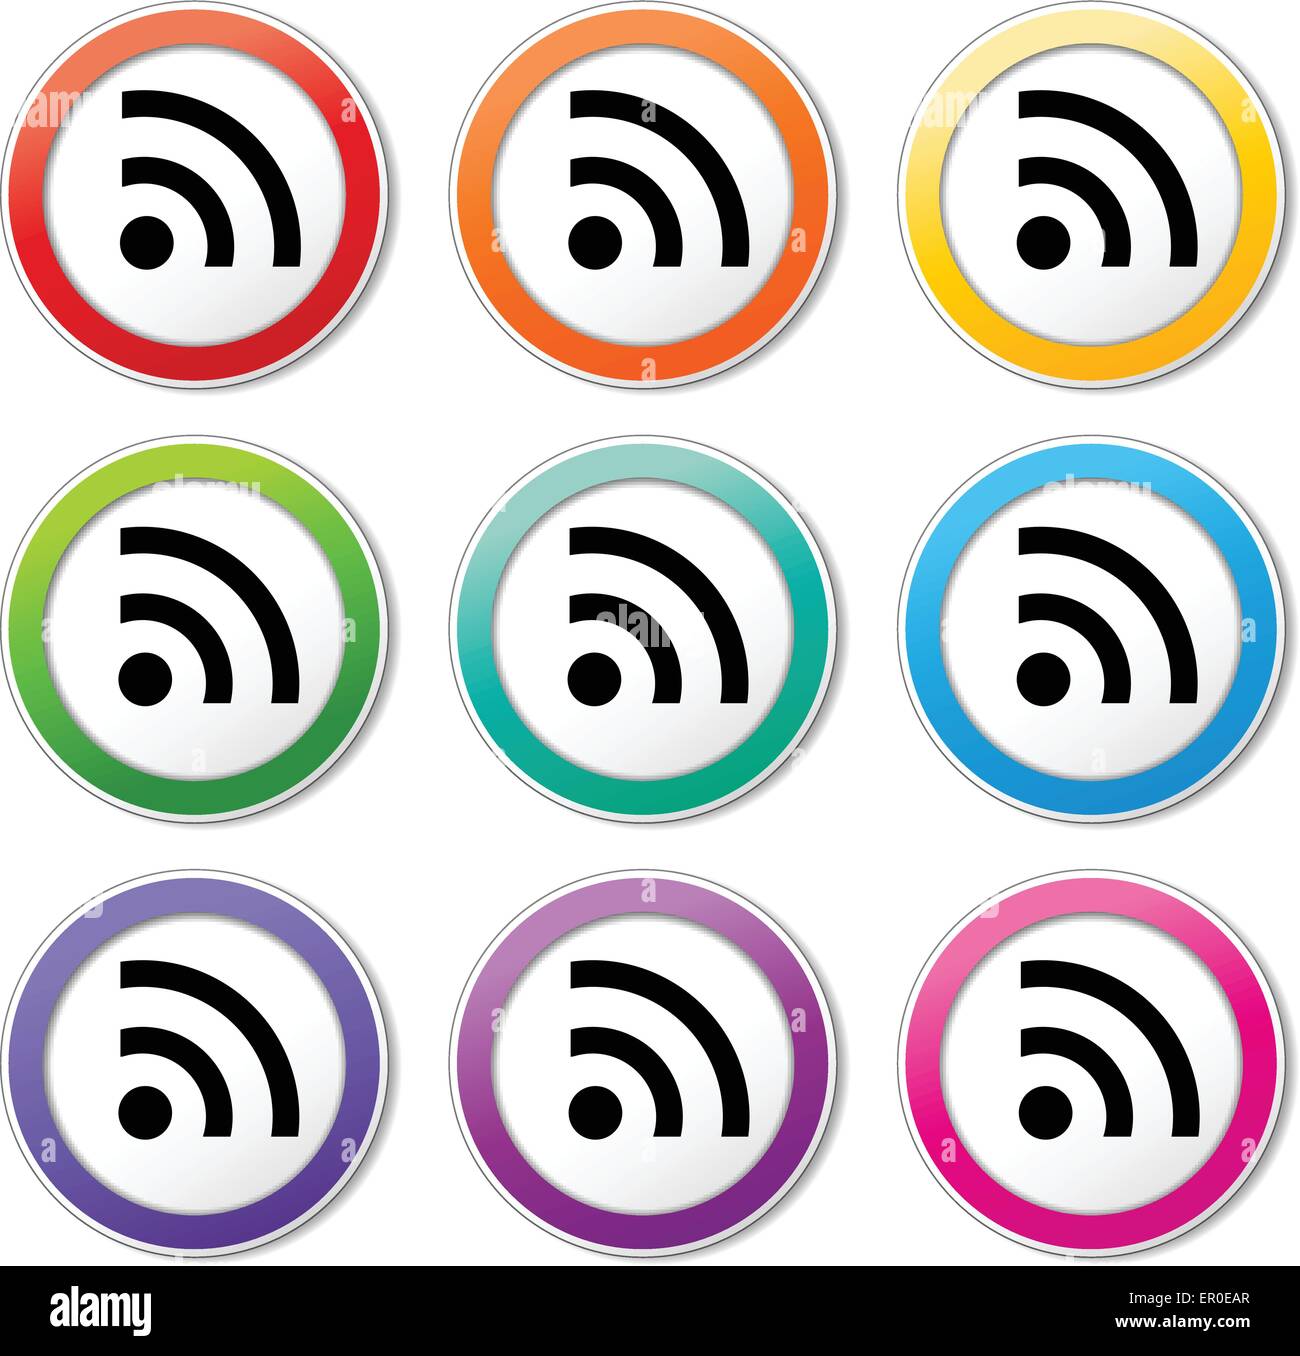 Illustration of wi fi signal icons various colors set Stock Vector